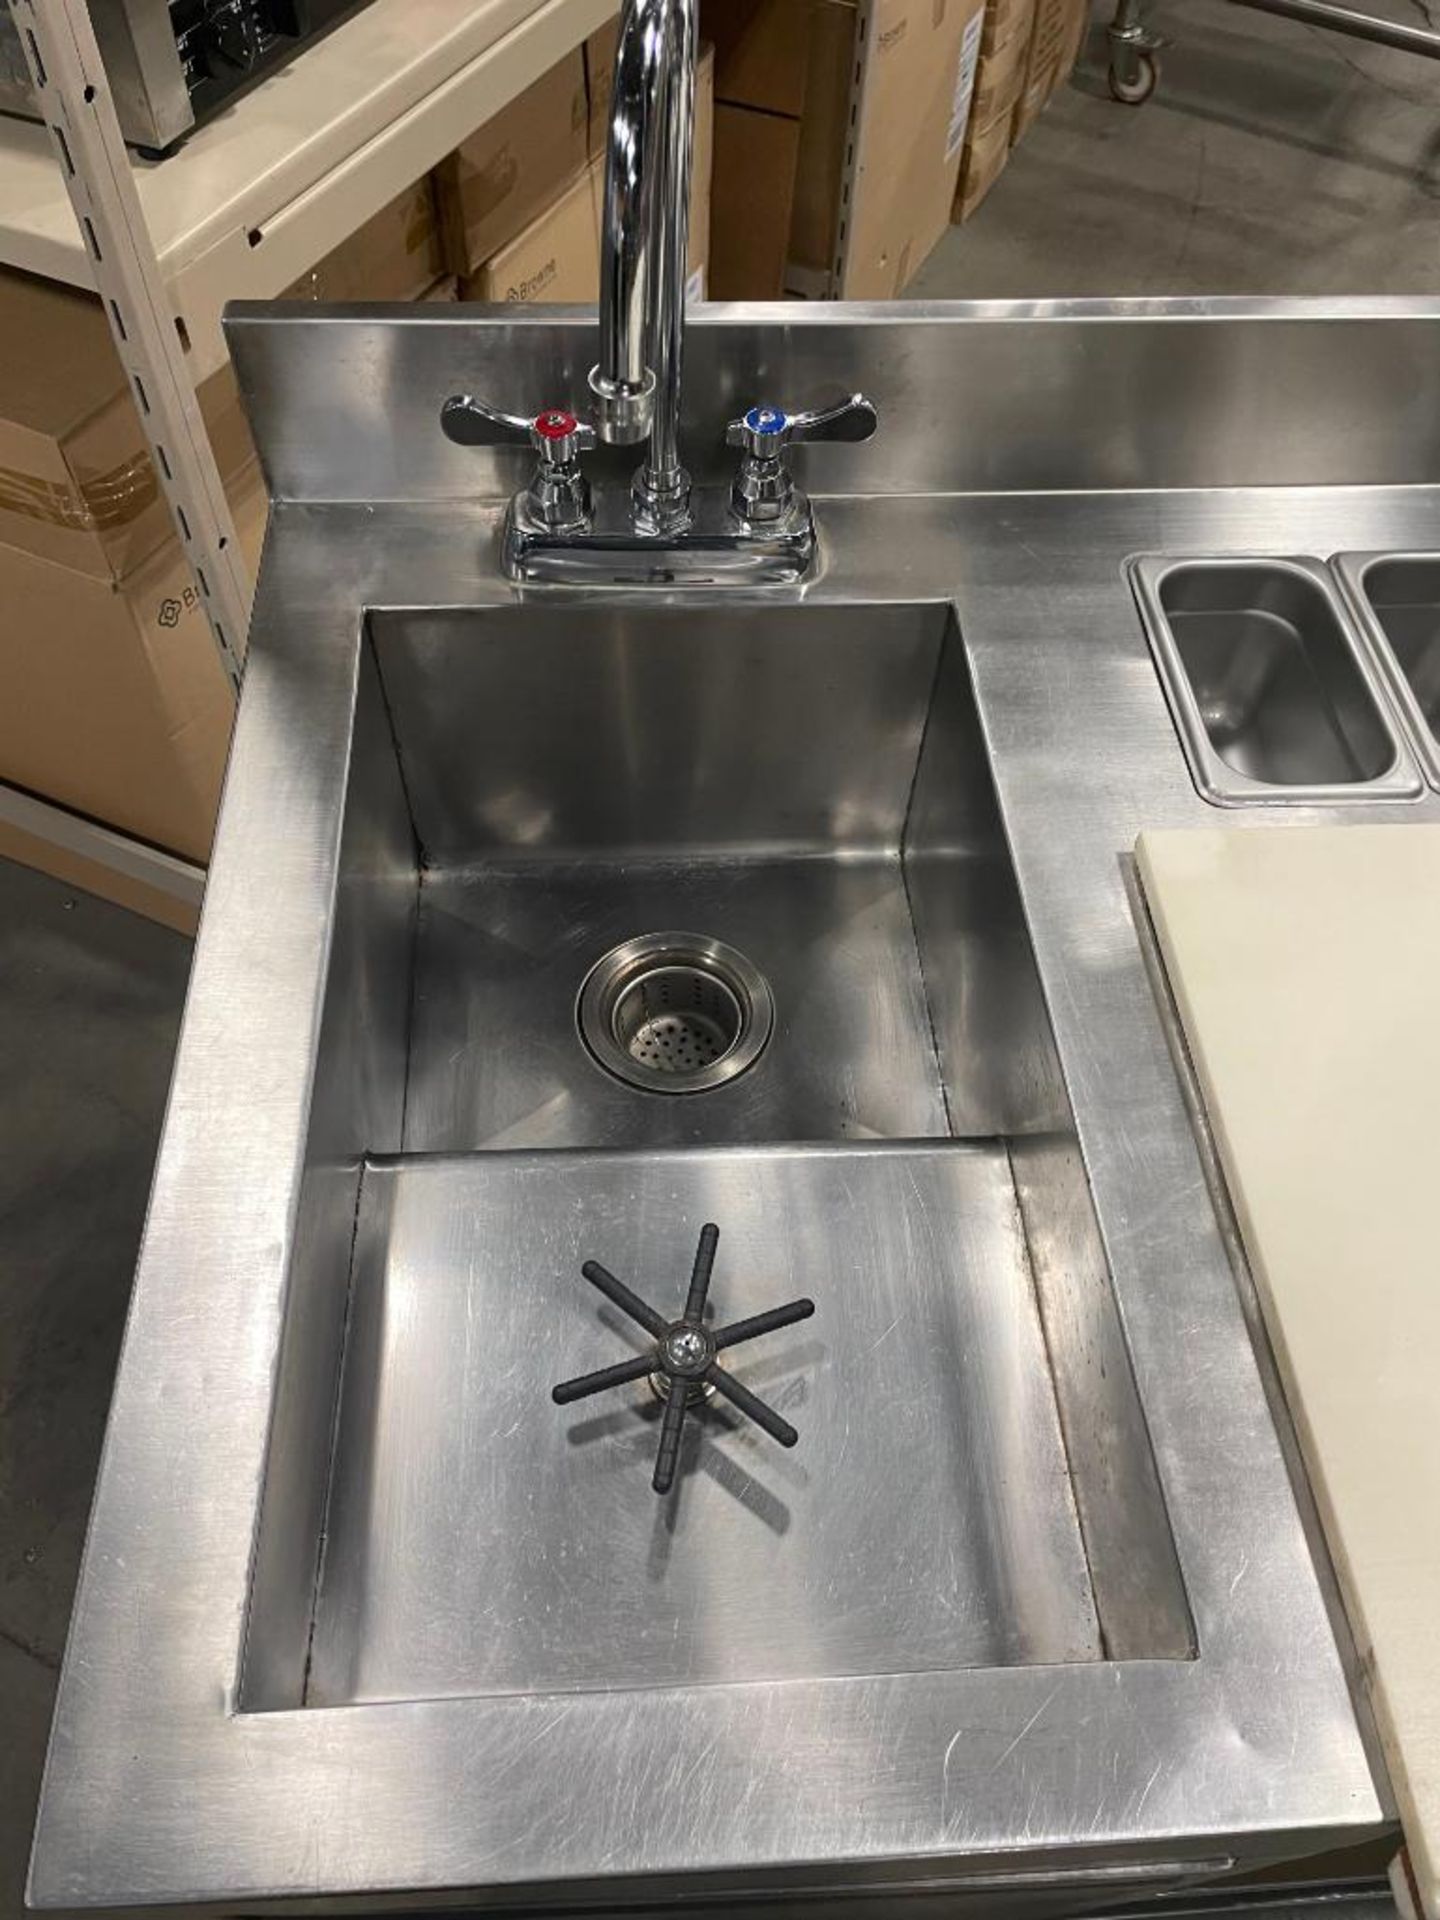 STAINLESS STEEL BEVERAGE TABLE WITH SINK, GLASS WASHER AND CUTTING BOARD - Image 3 of 14